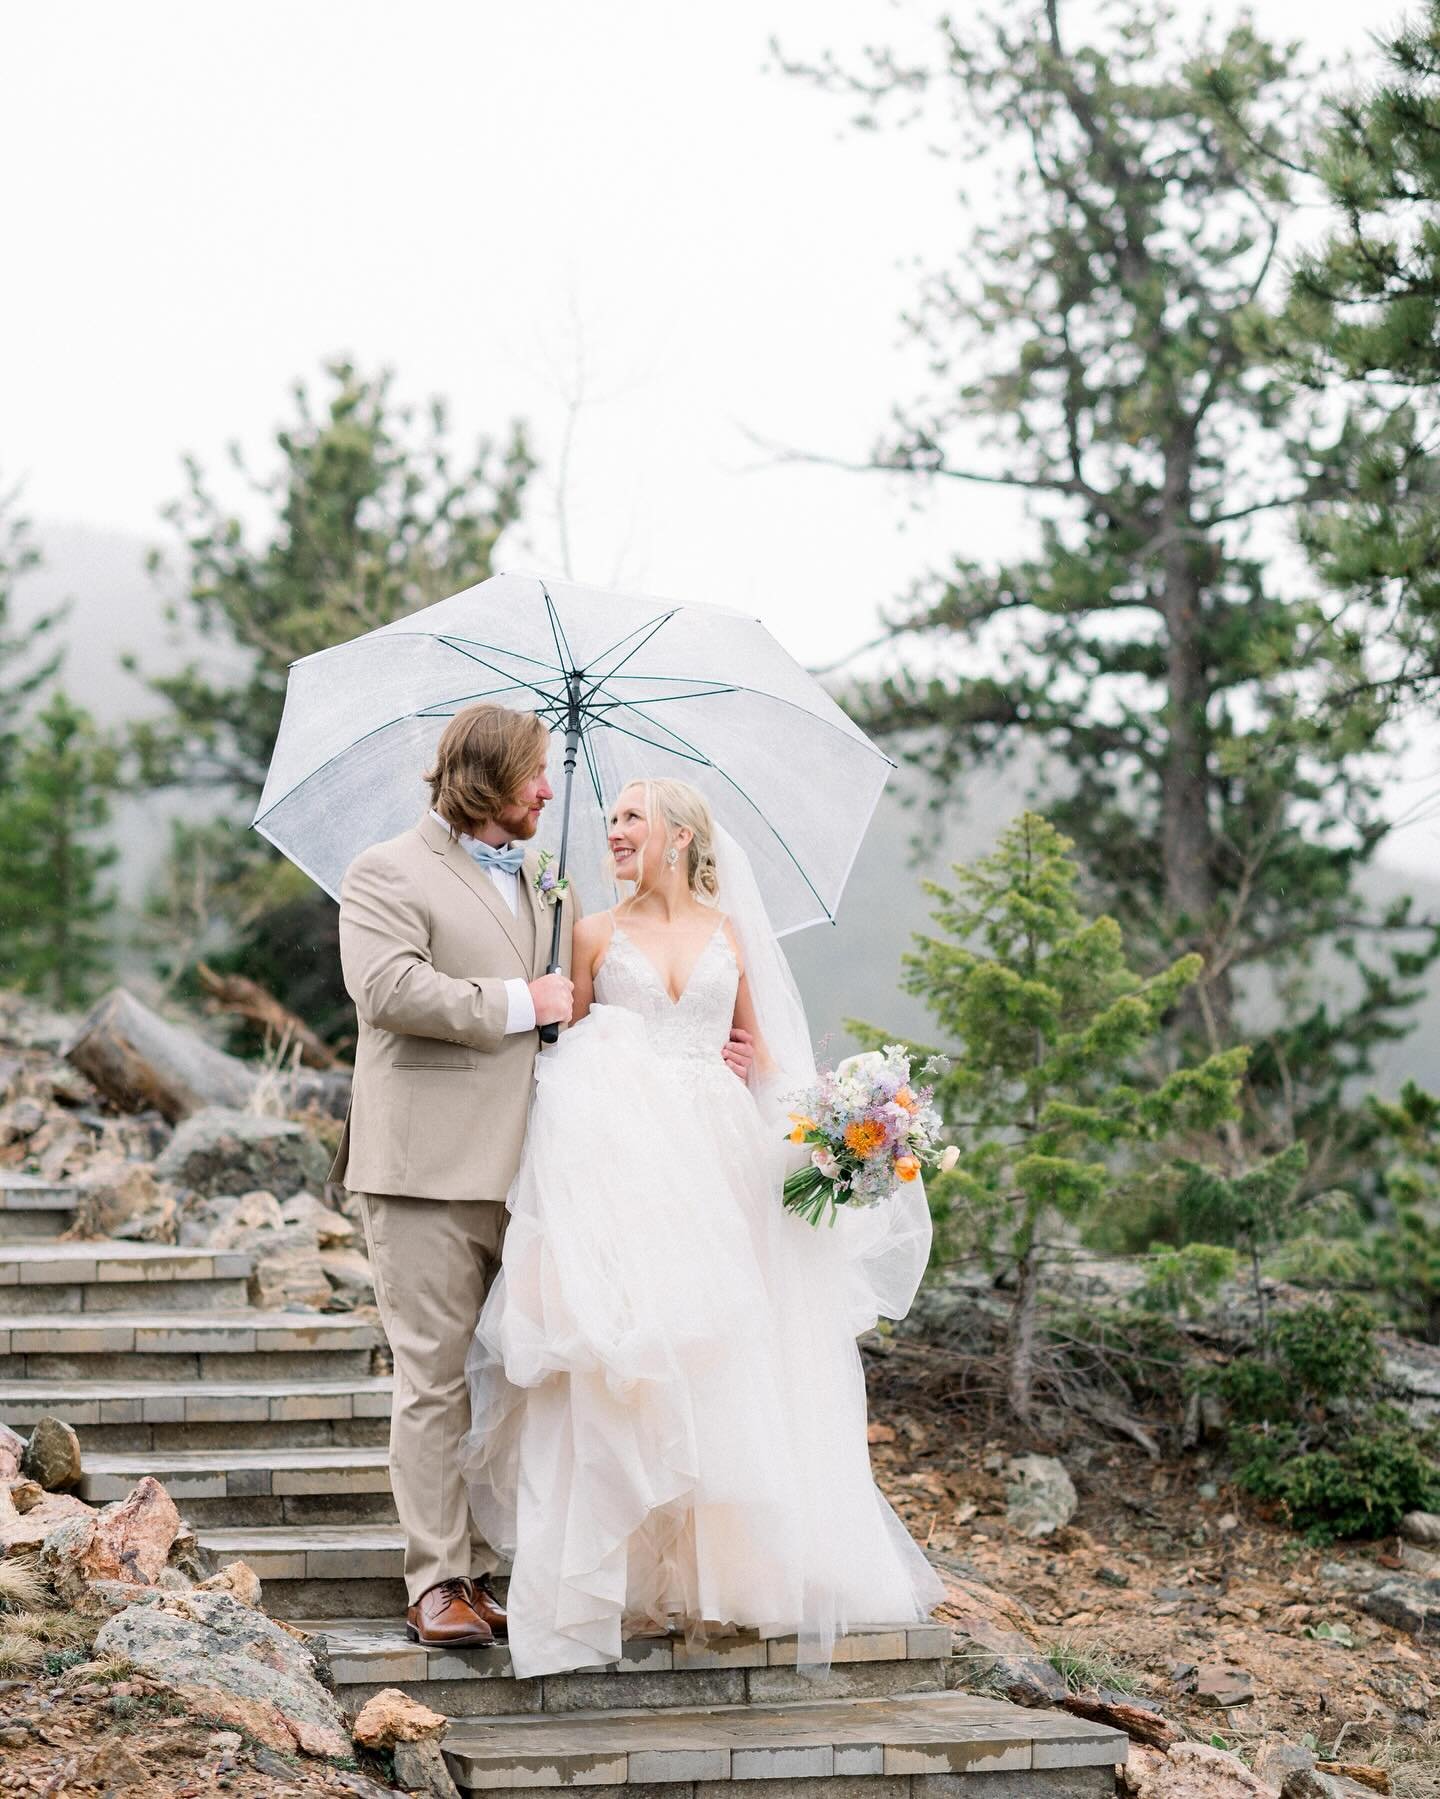 Meghen + Taylor
5.11.24

While the weather coming over the mountains gave us a little bit of pause, these two made nothing but the best of it.  And oh what a beautiful day they had!!!

Photographer: @allisoneasterlingphotography
Coordination: @enchan